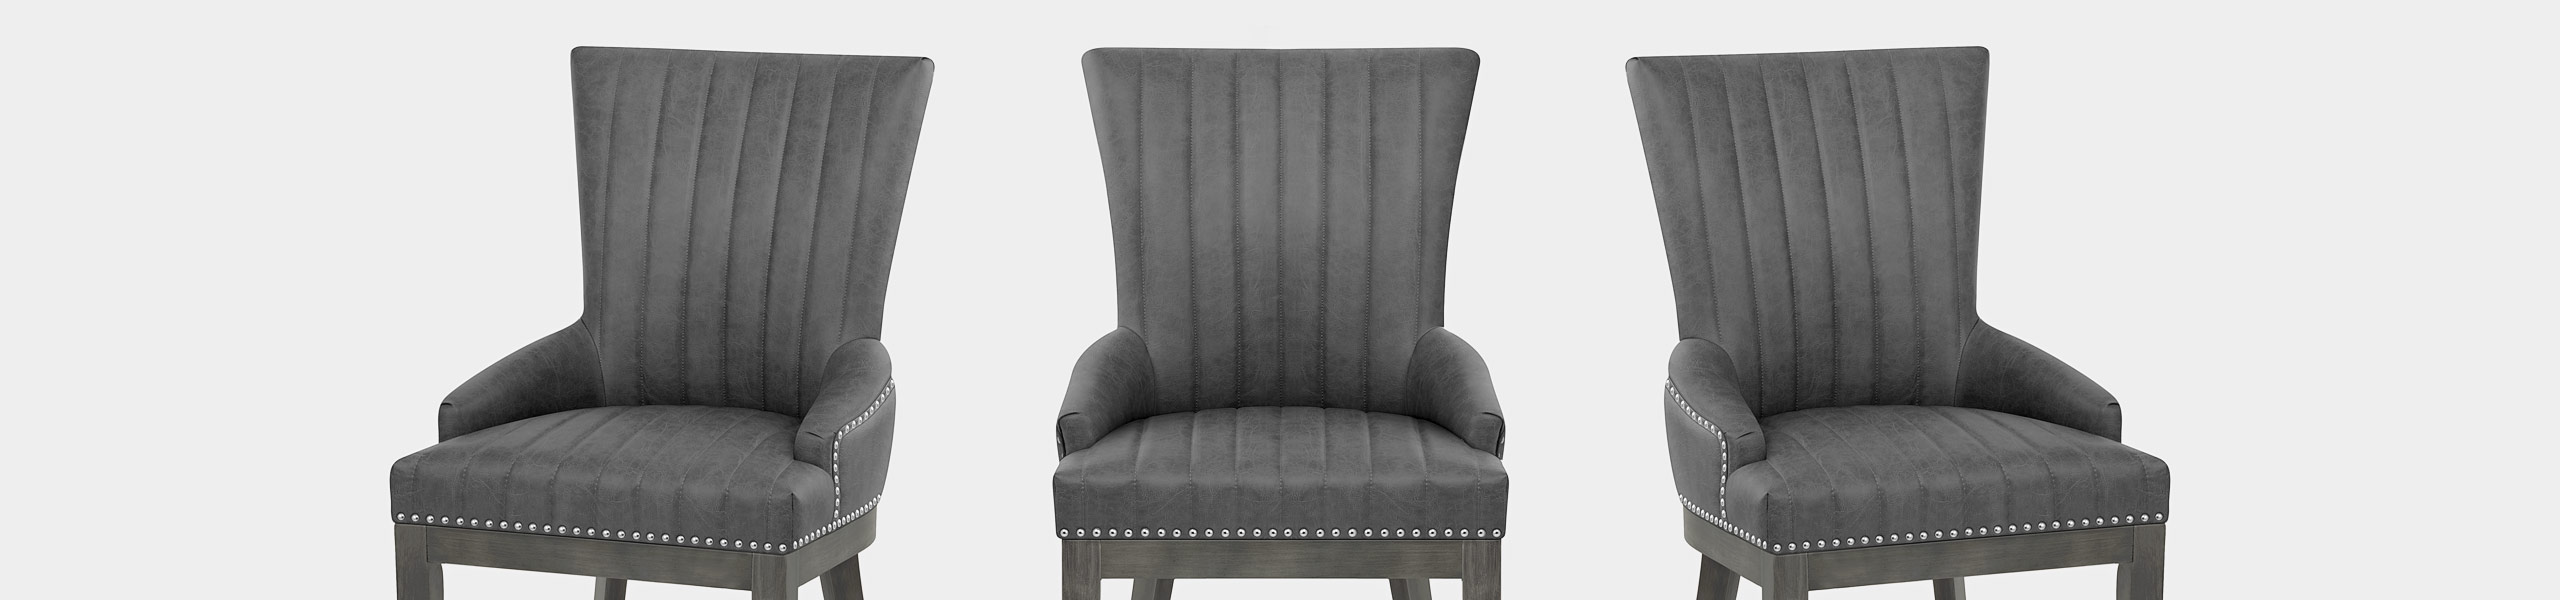 Chiltern Wooden Dining Chair Grey Video Banner